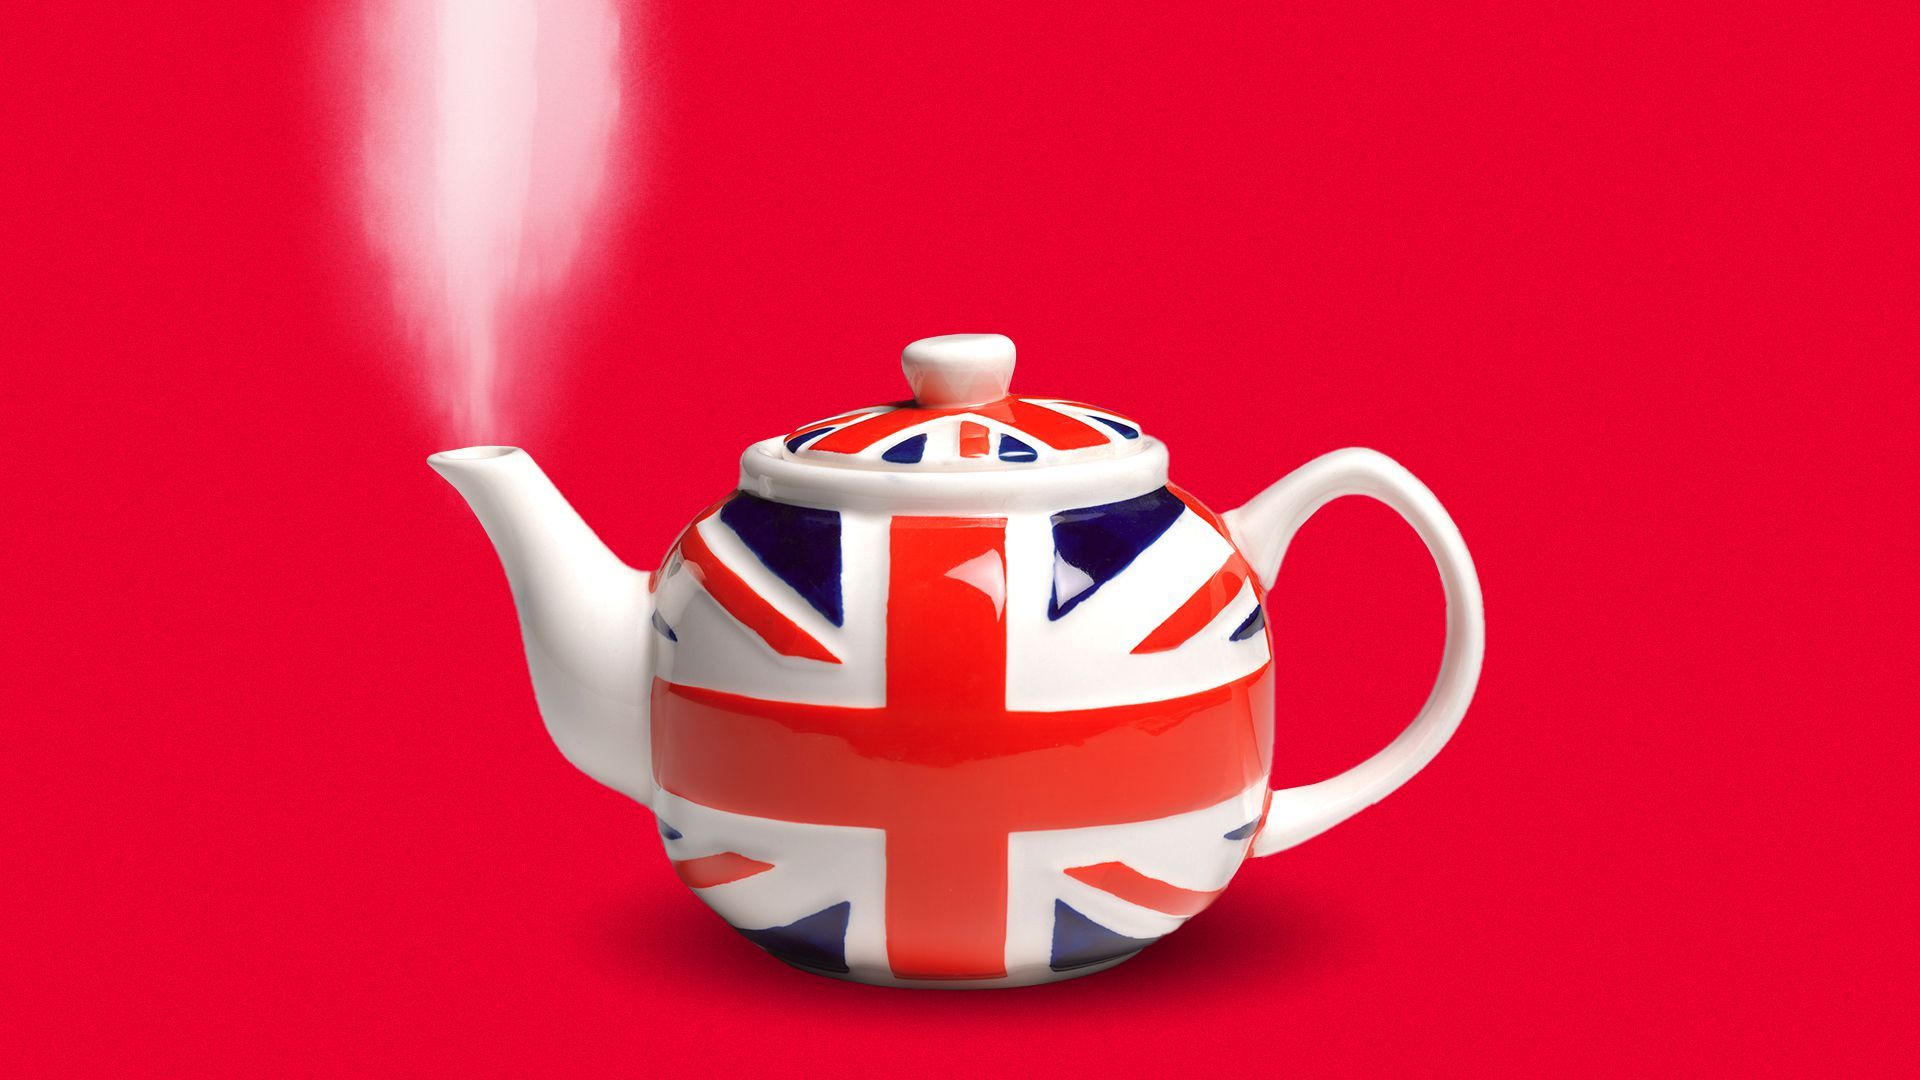 Illustration of a steaming tea kettle with the U.K. flag on the side.